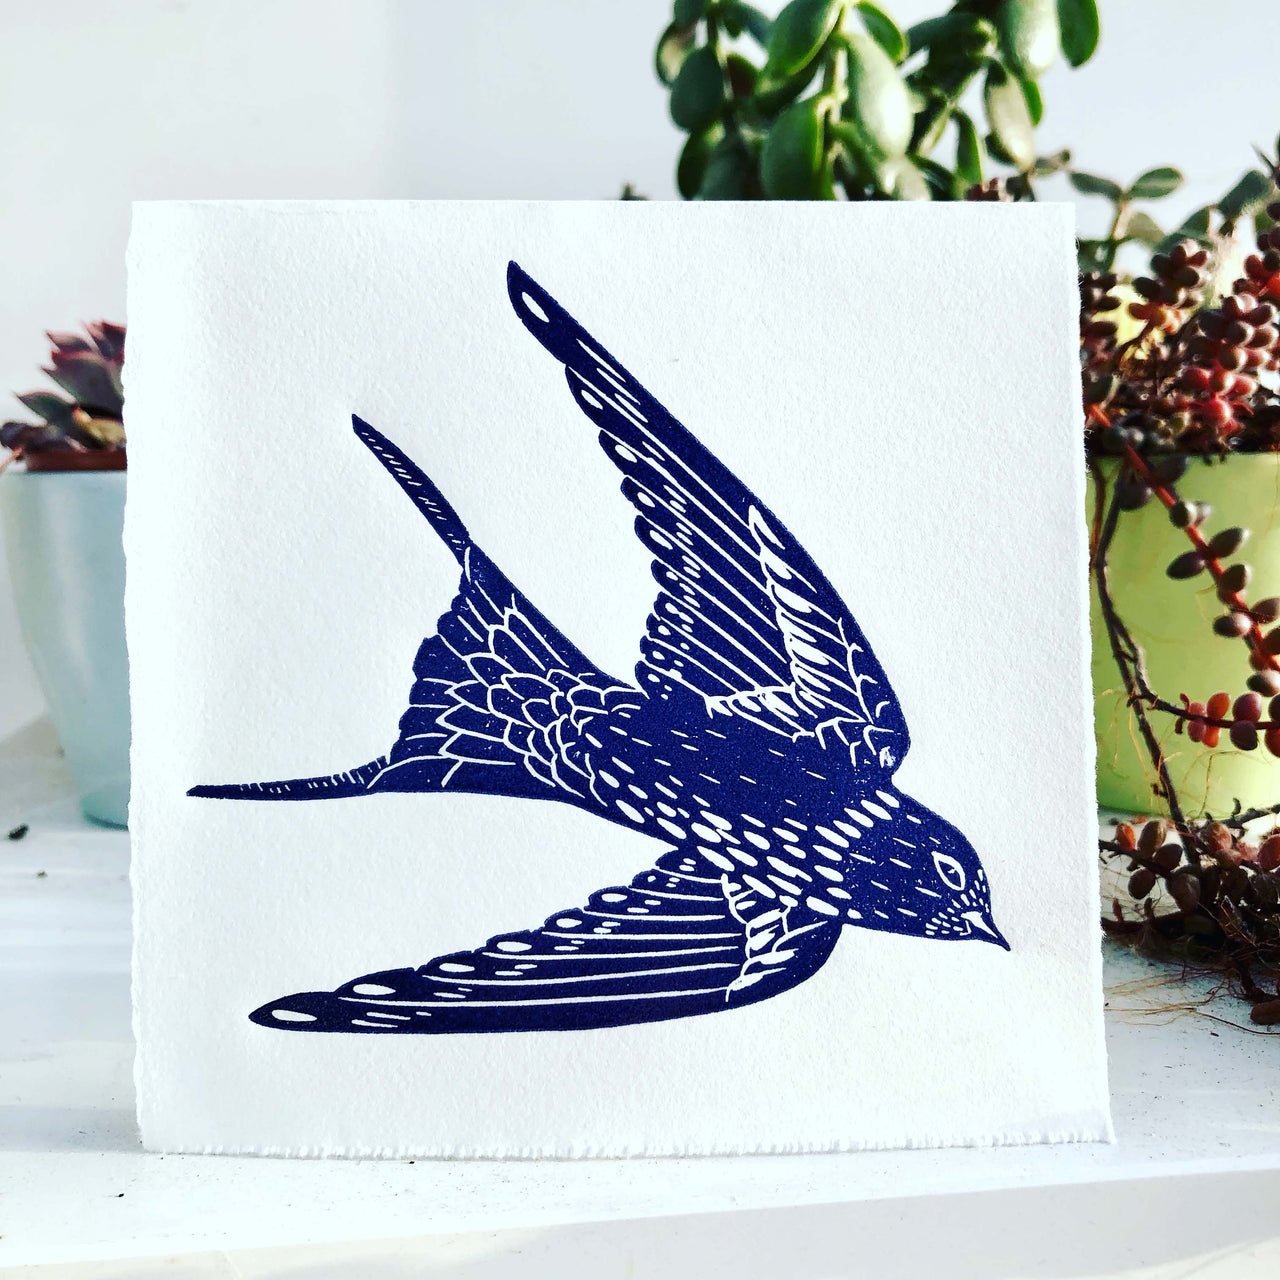 Swallows in flight hand printed lino cut greetings card by Claire Armitage